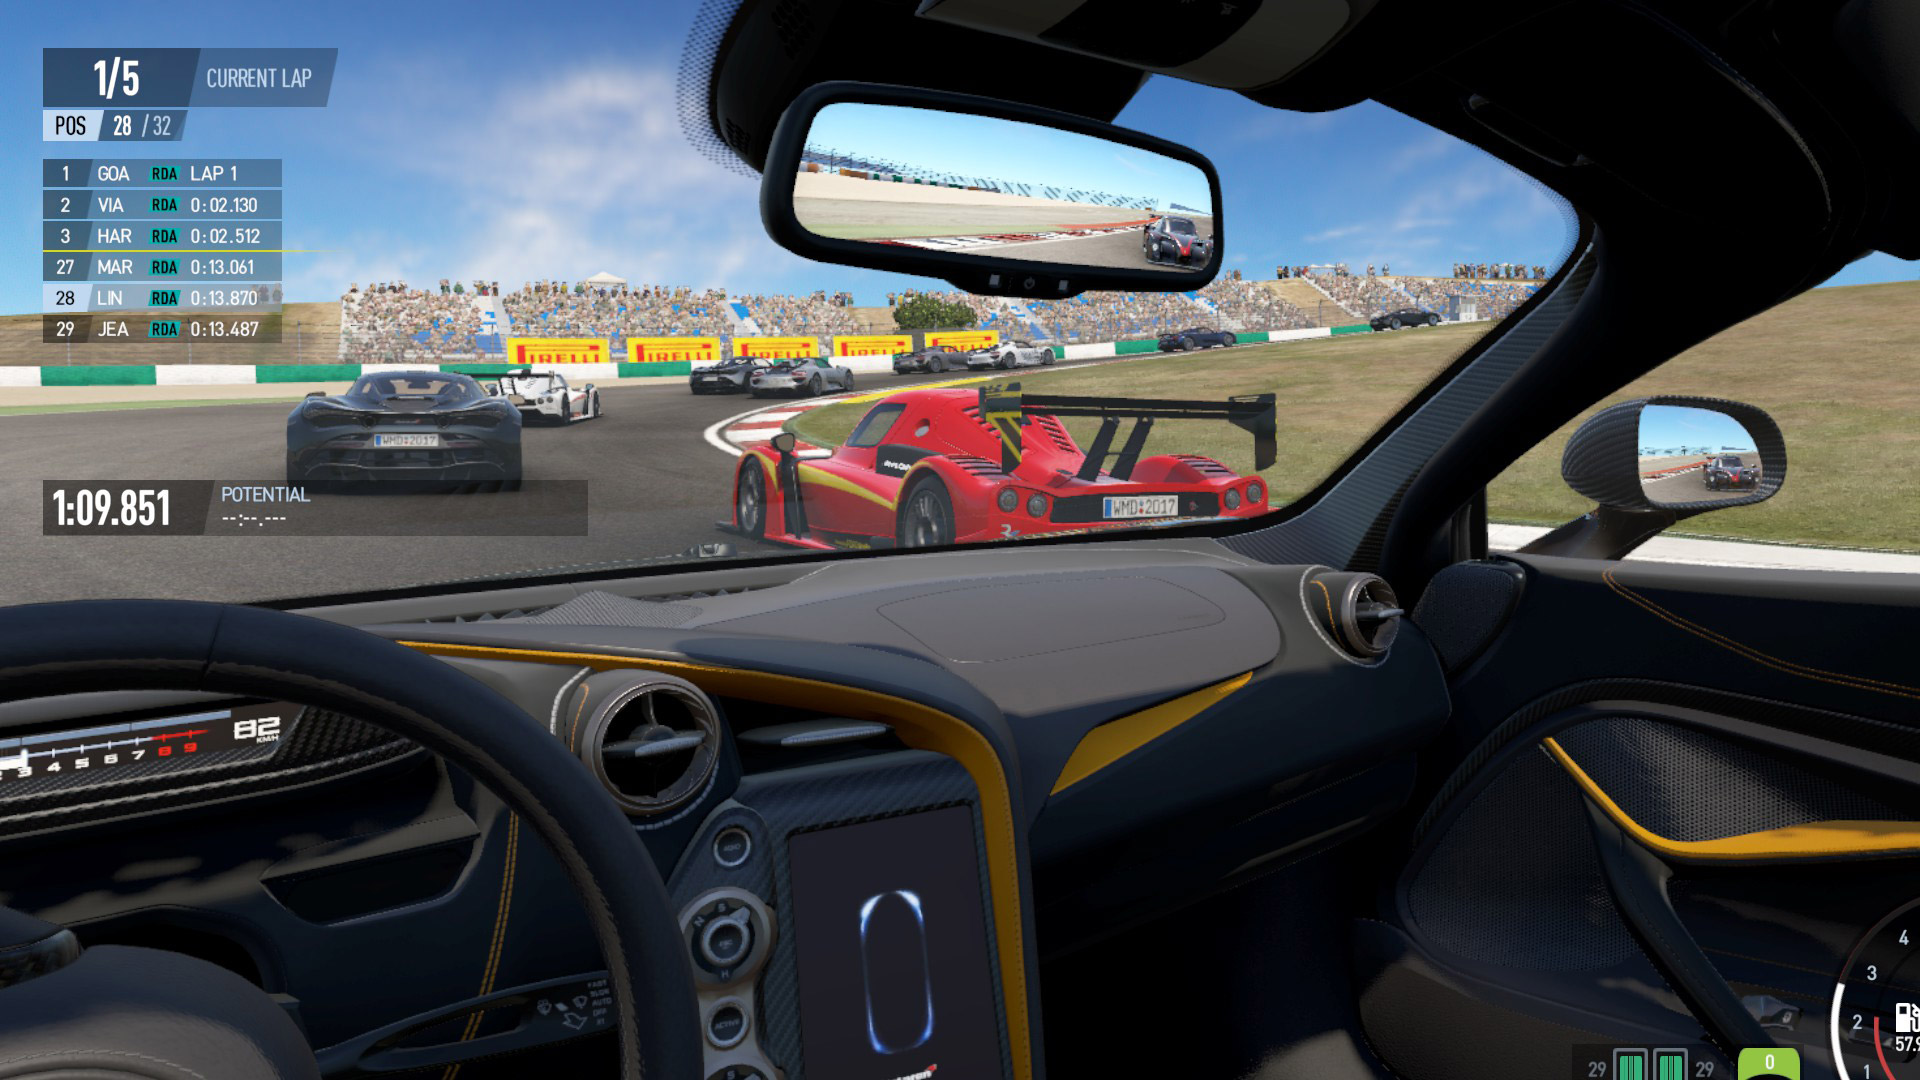 best vr headset for project cars 2